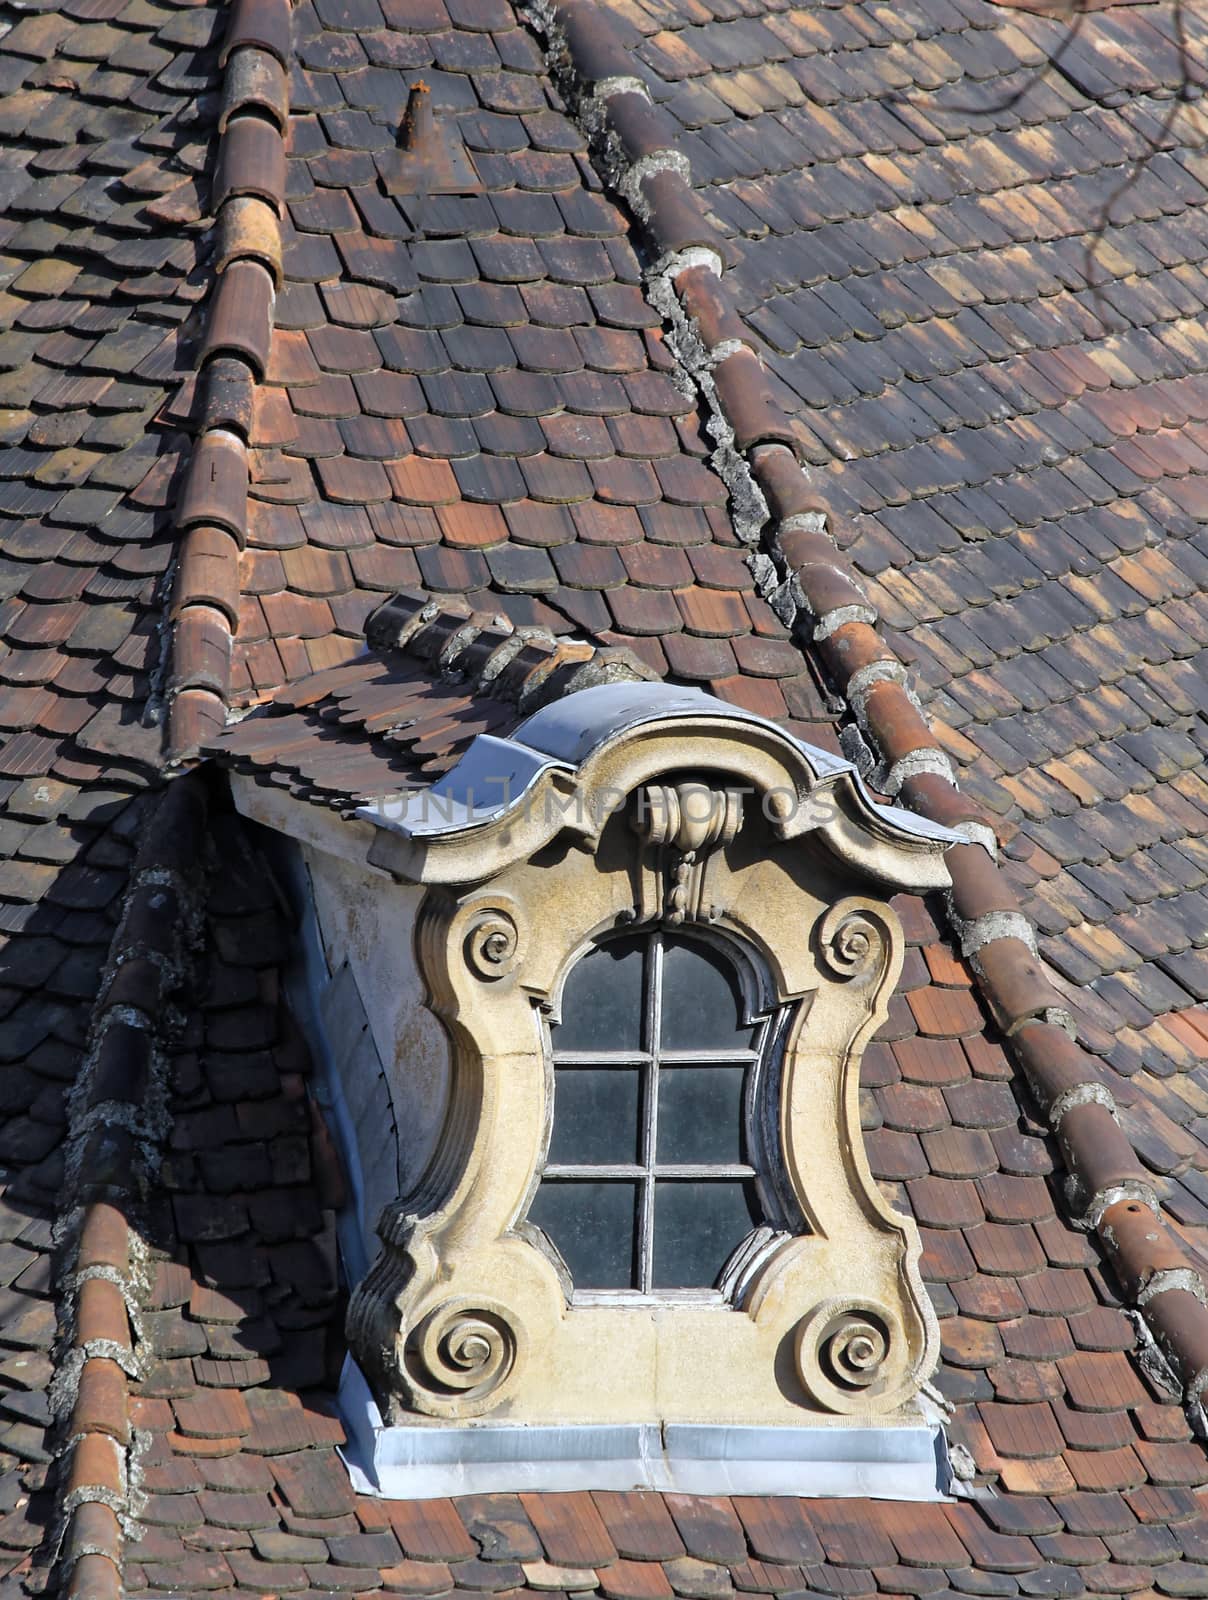 weathered old ornate dormer windows and roof tiles.